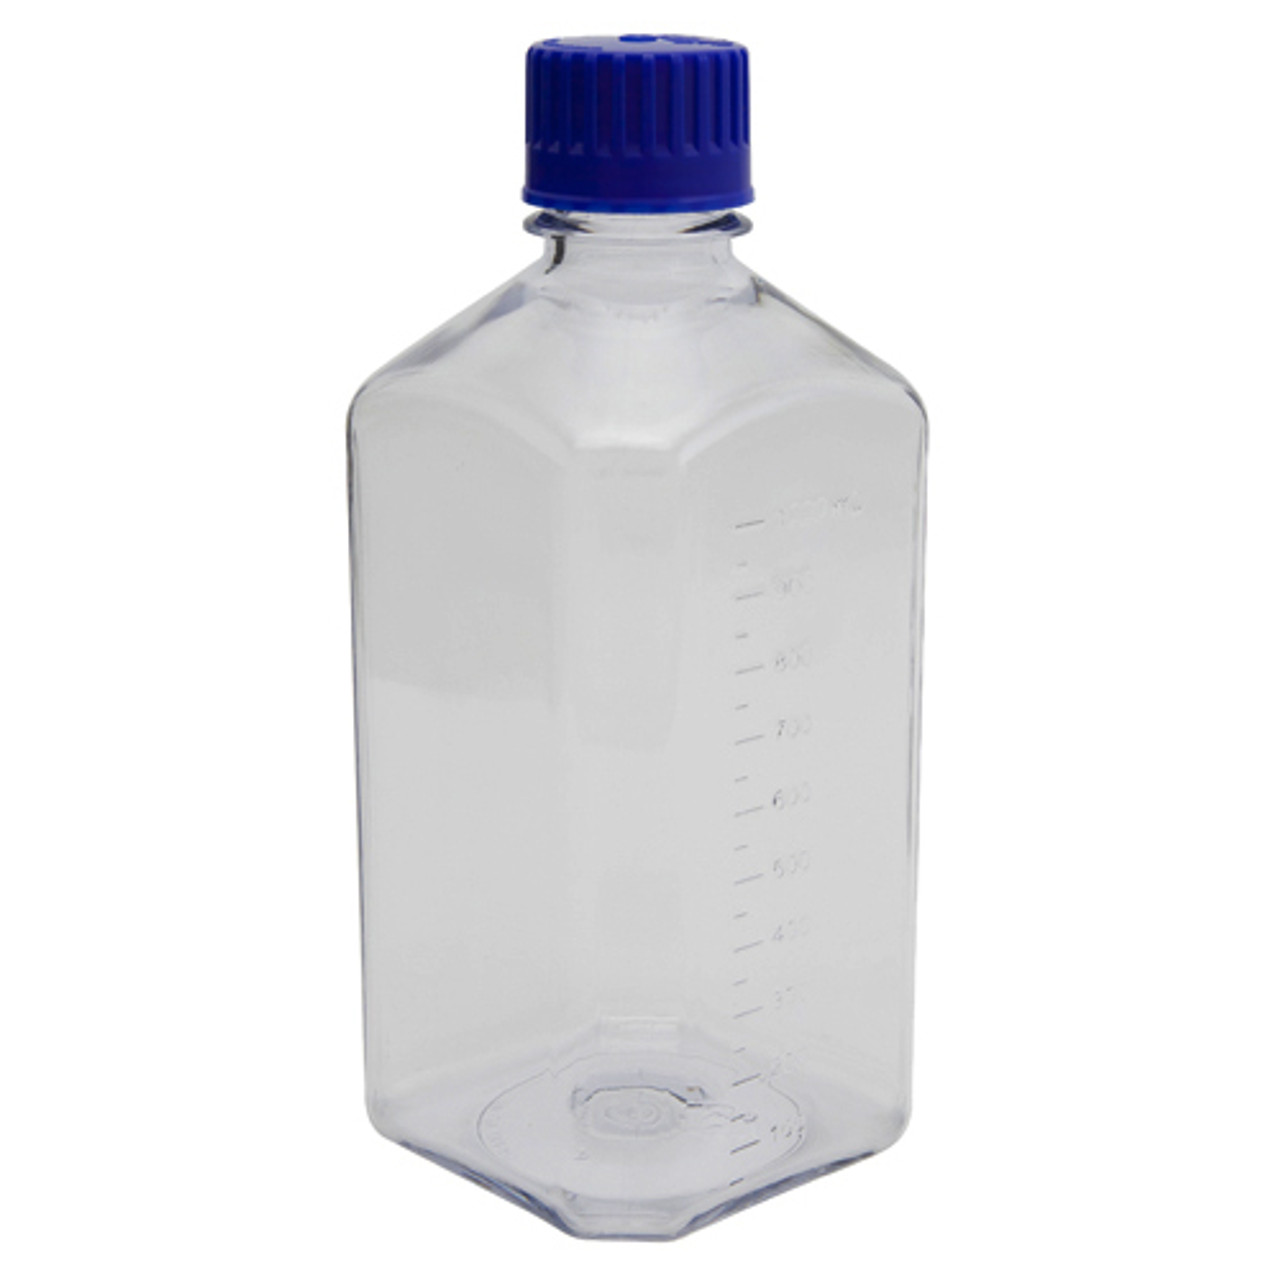 Narrow mouth bottle square clear glass, 500 ml, 32, high form